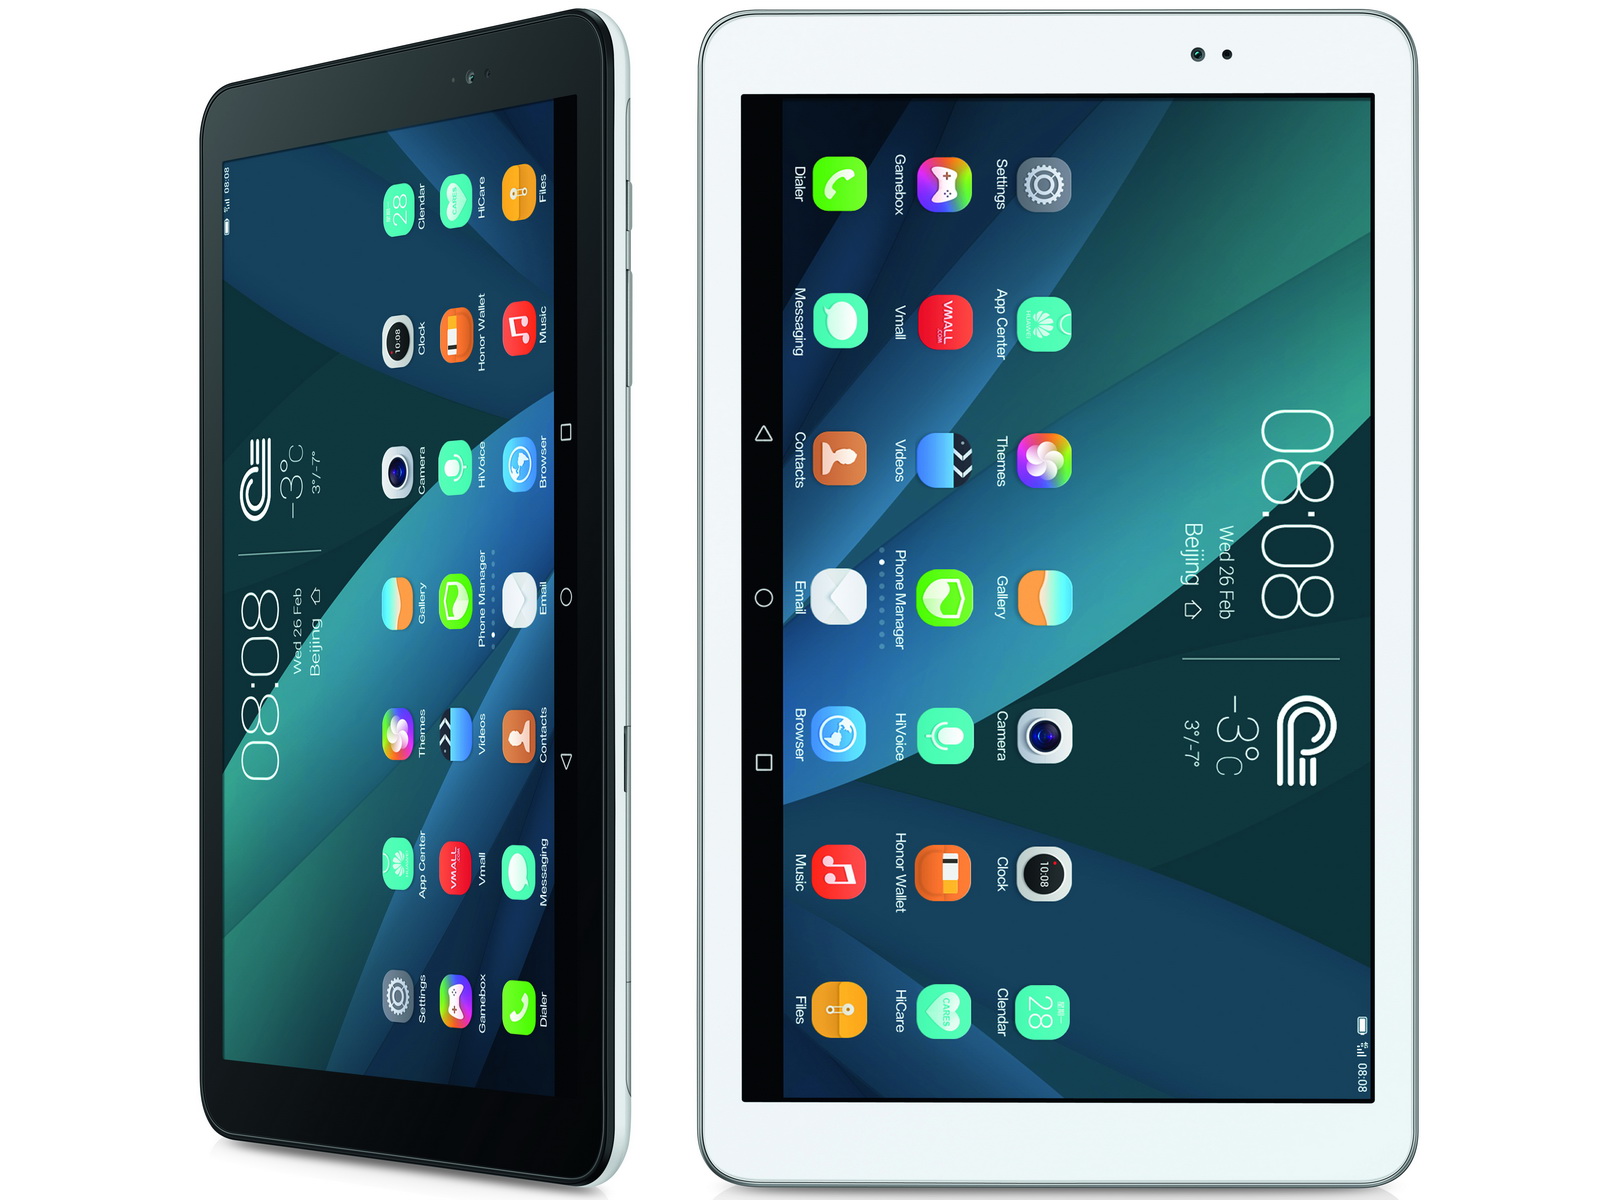 Huawei MediaPad T1 7.0 and T1 10 oficially announced